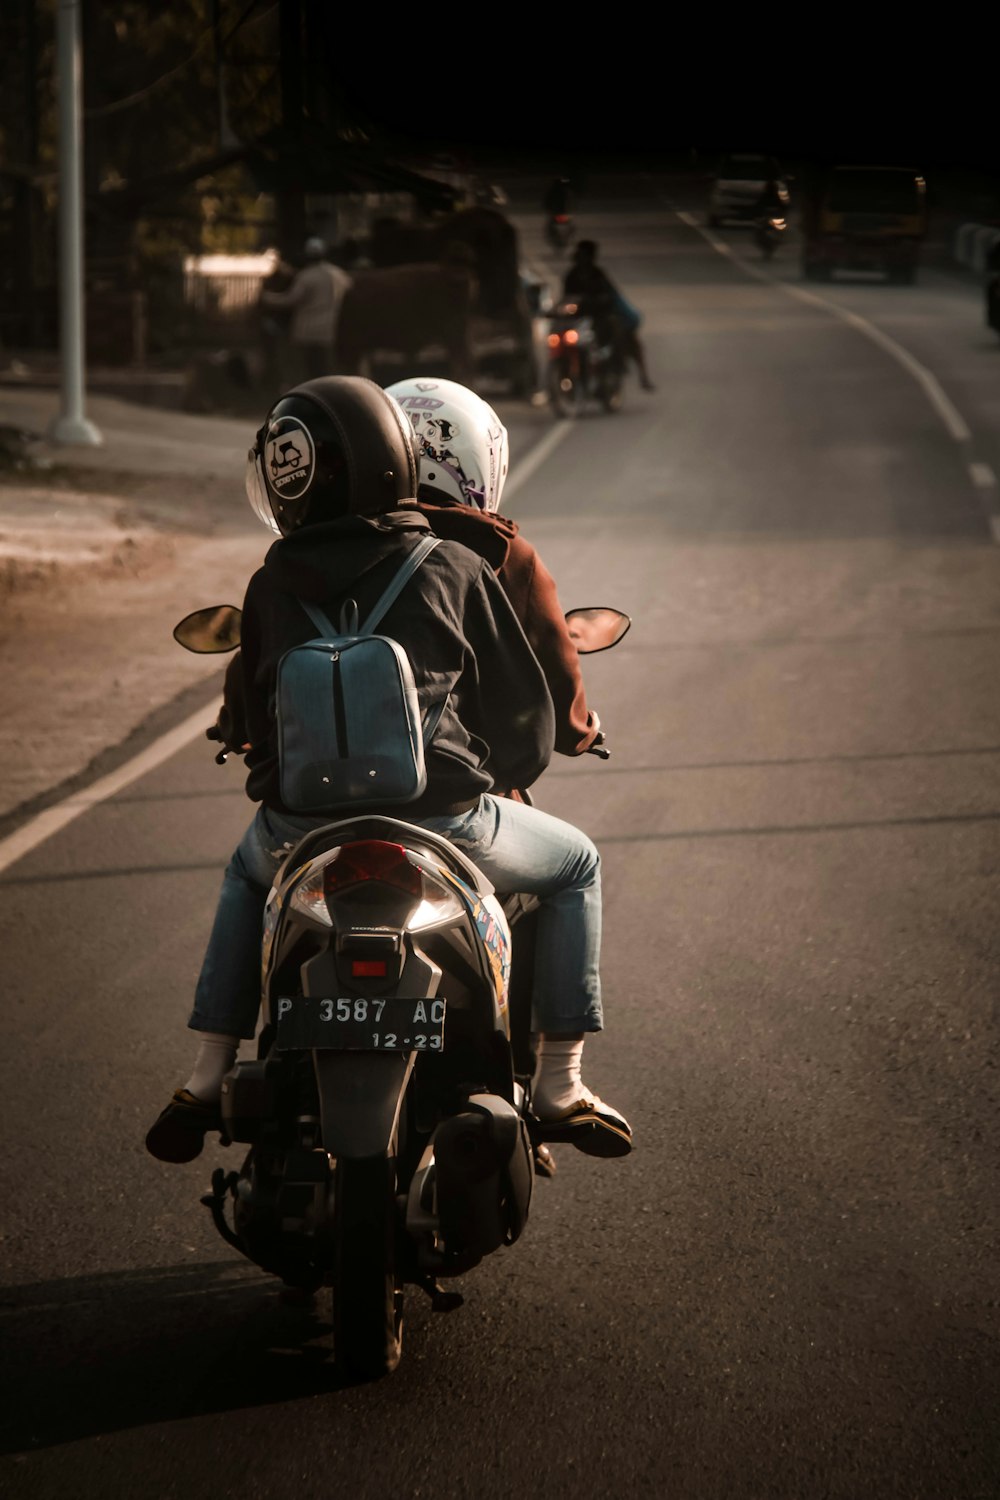 two persons ride motorcycle at the street